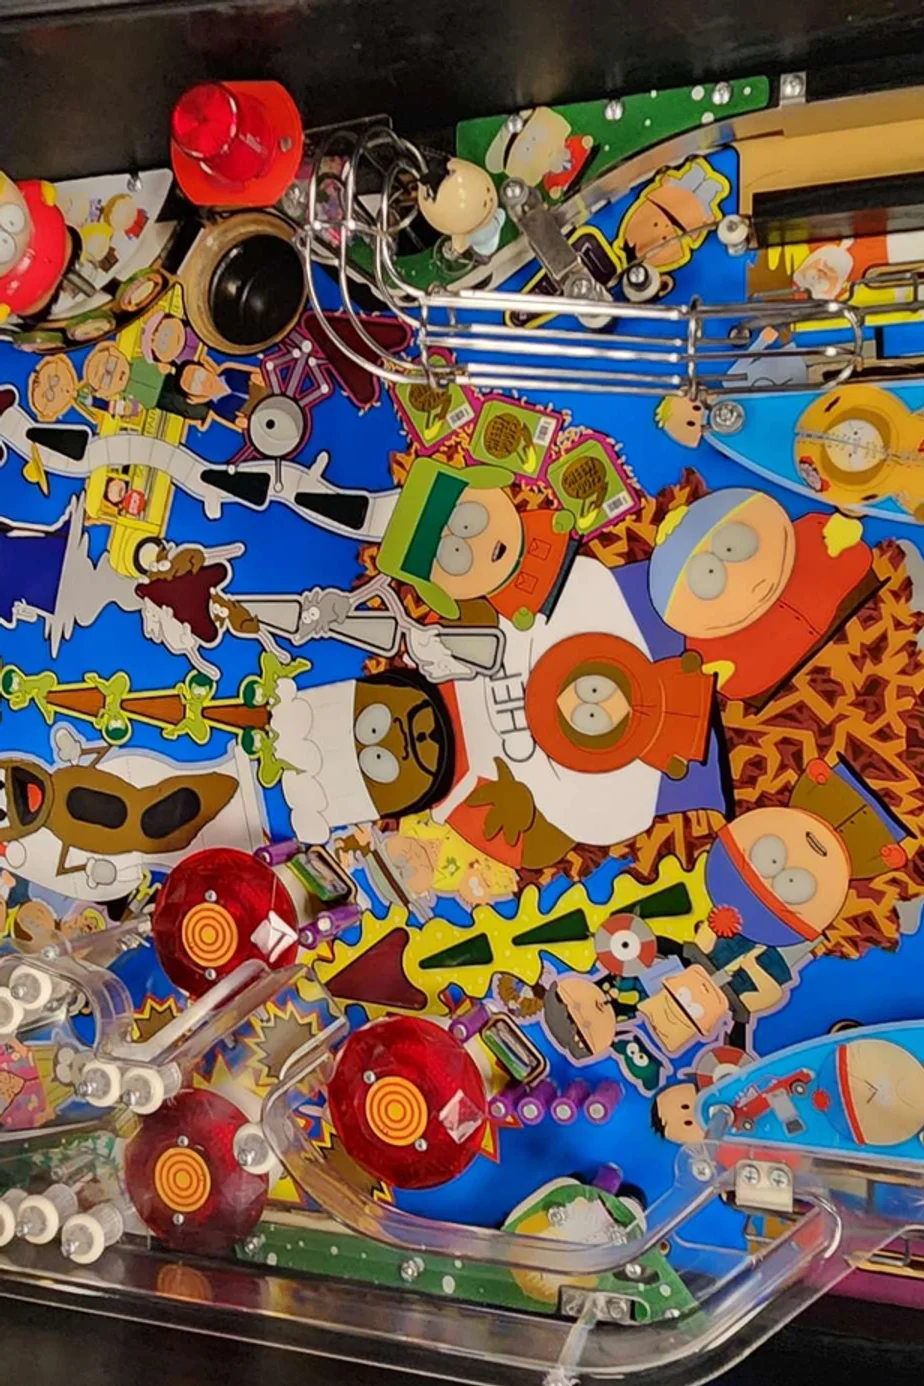 south park pinball machine for sale